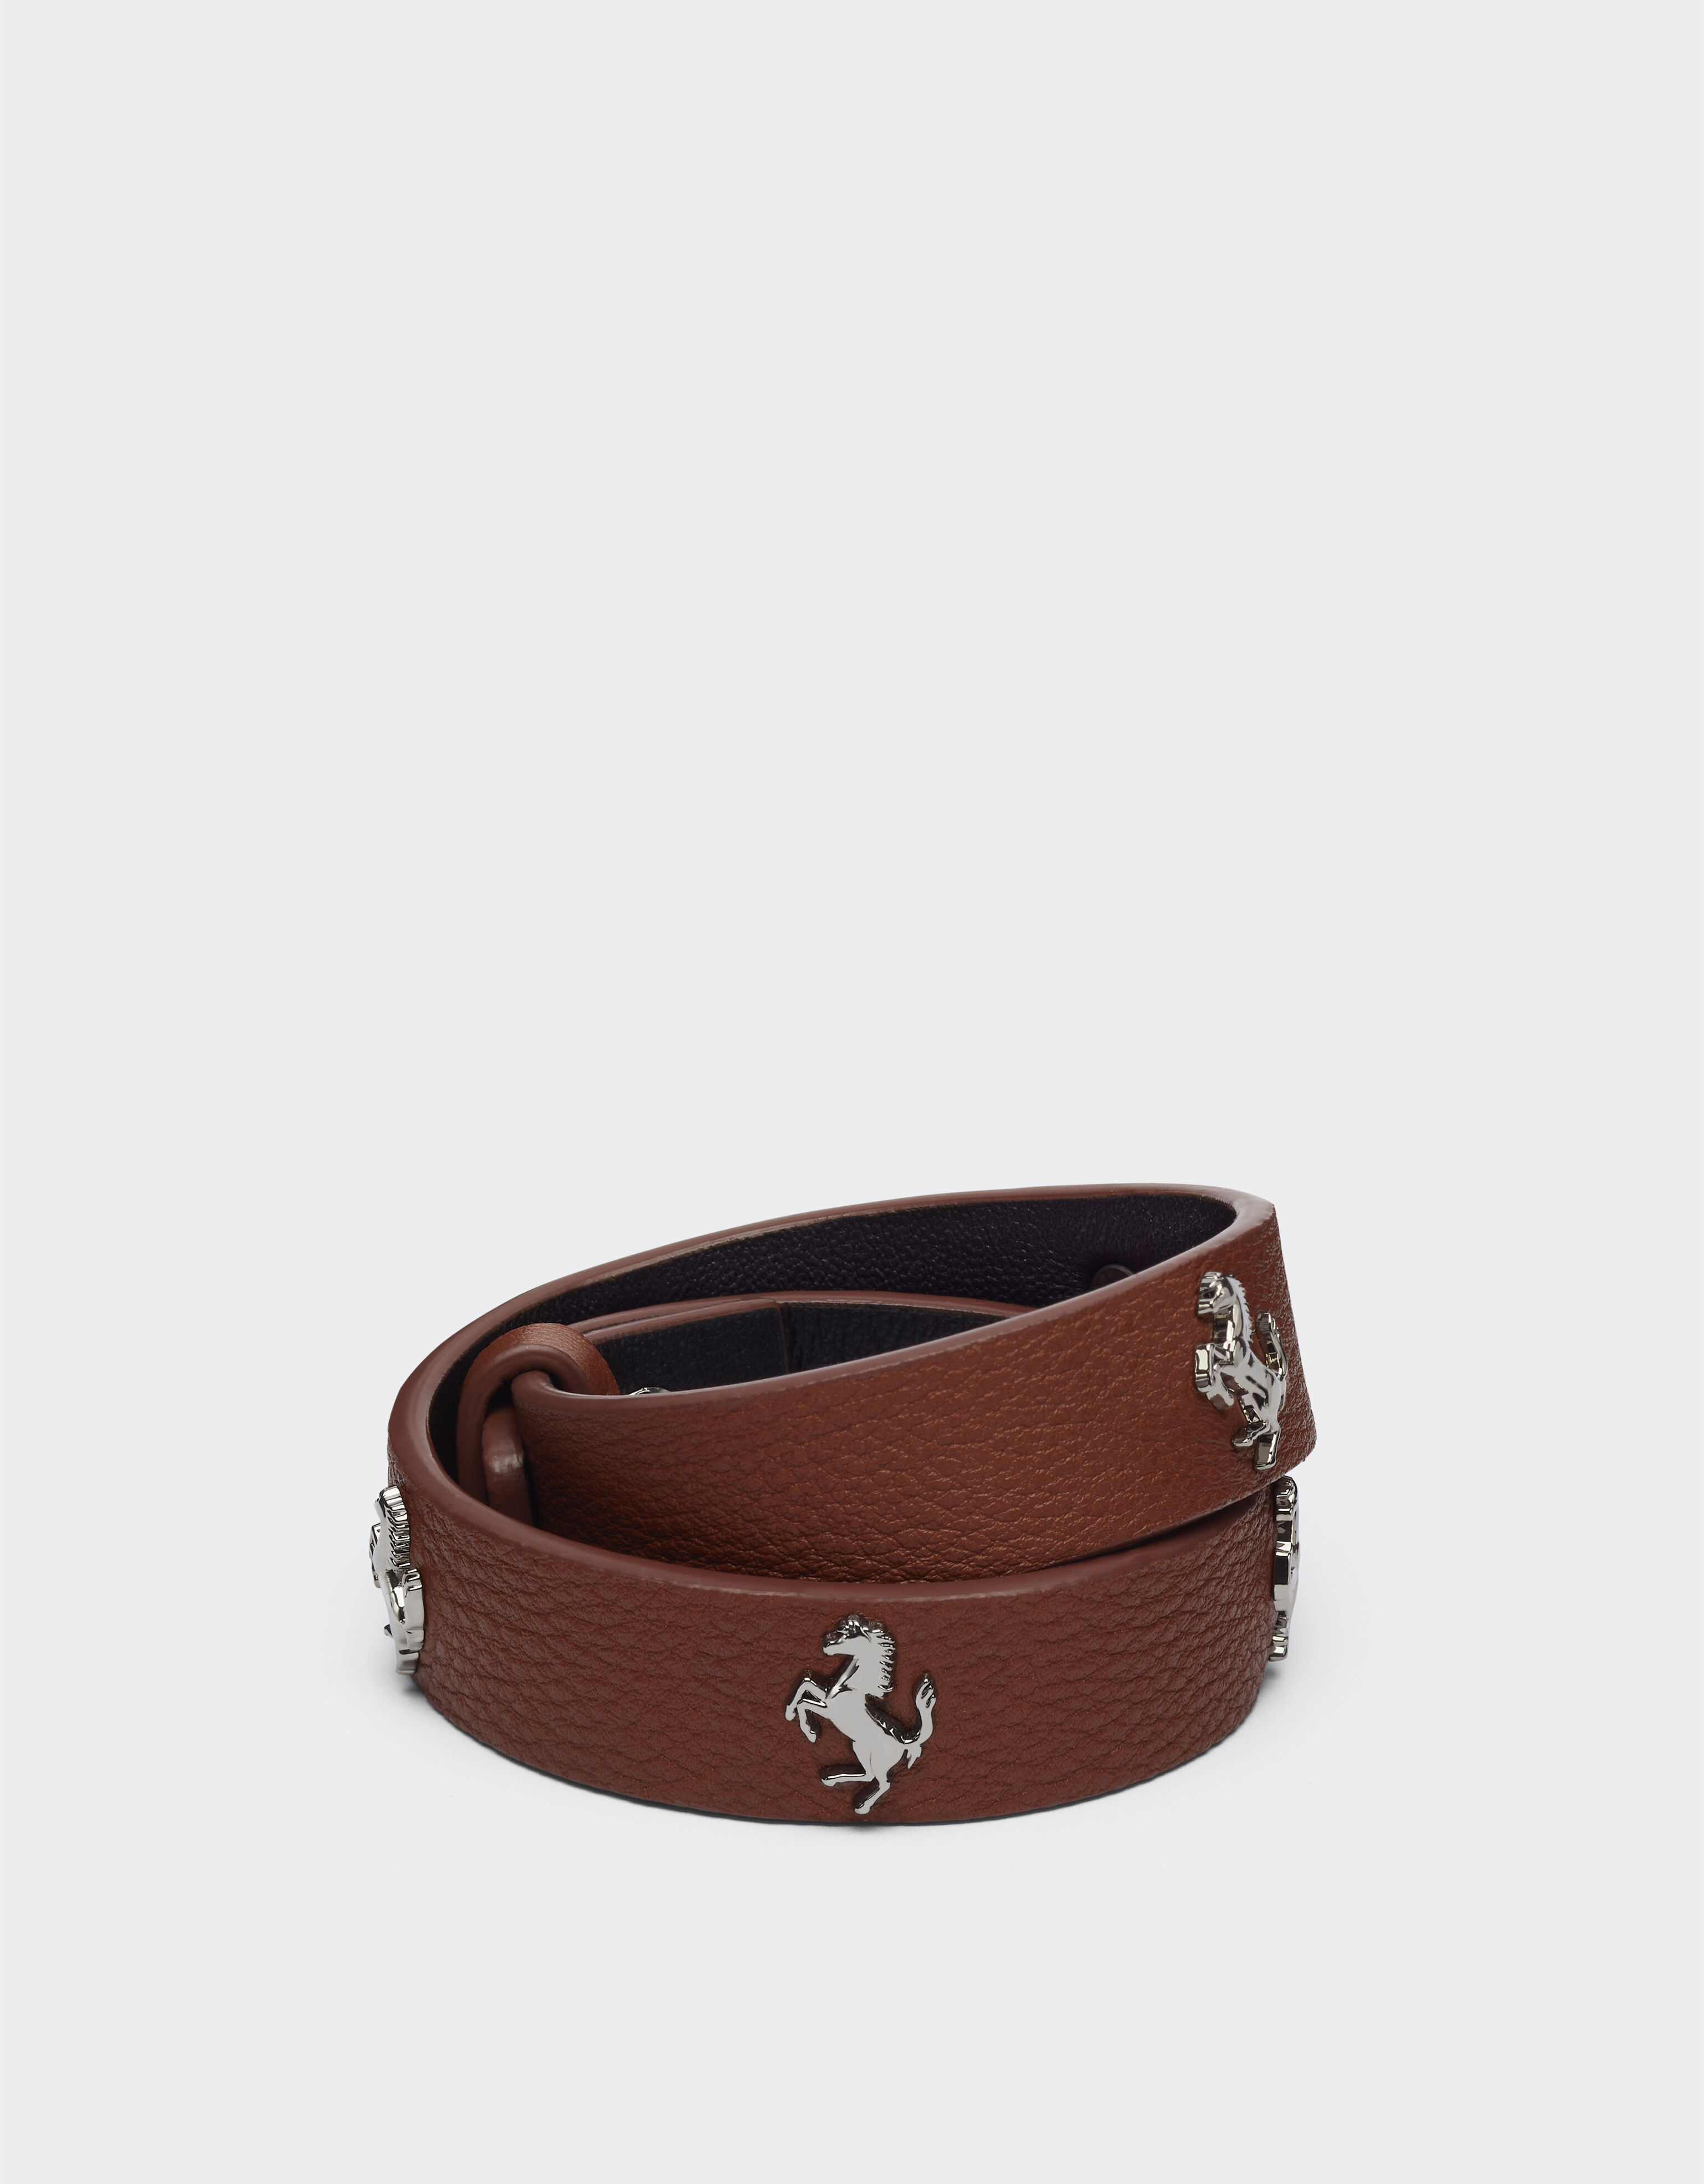 Ferrari Textured leather bracelet with studs Rosso Dino 20599f